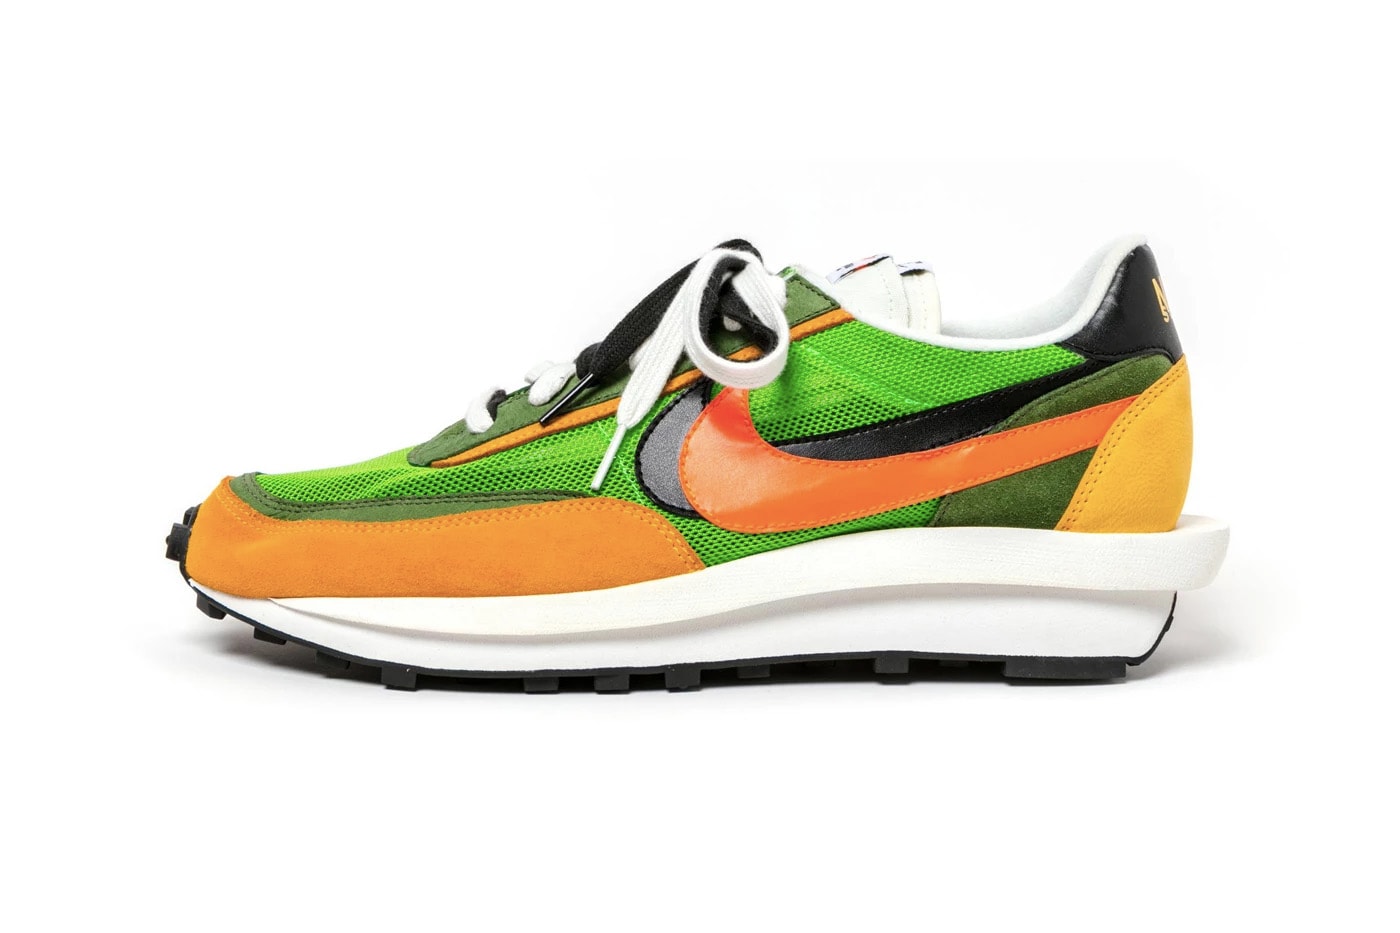 sacai x Nike LDV Waffle Daybreak Blue Yellow Red Green Orange Release Date Pushed Back Delayed Scheduled March 7 